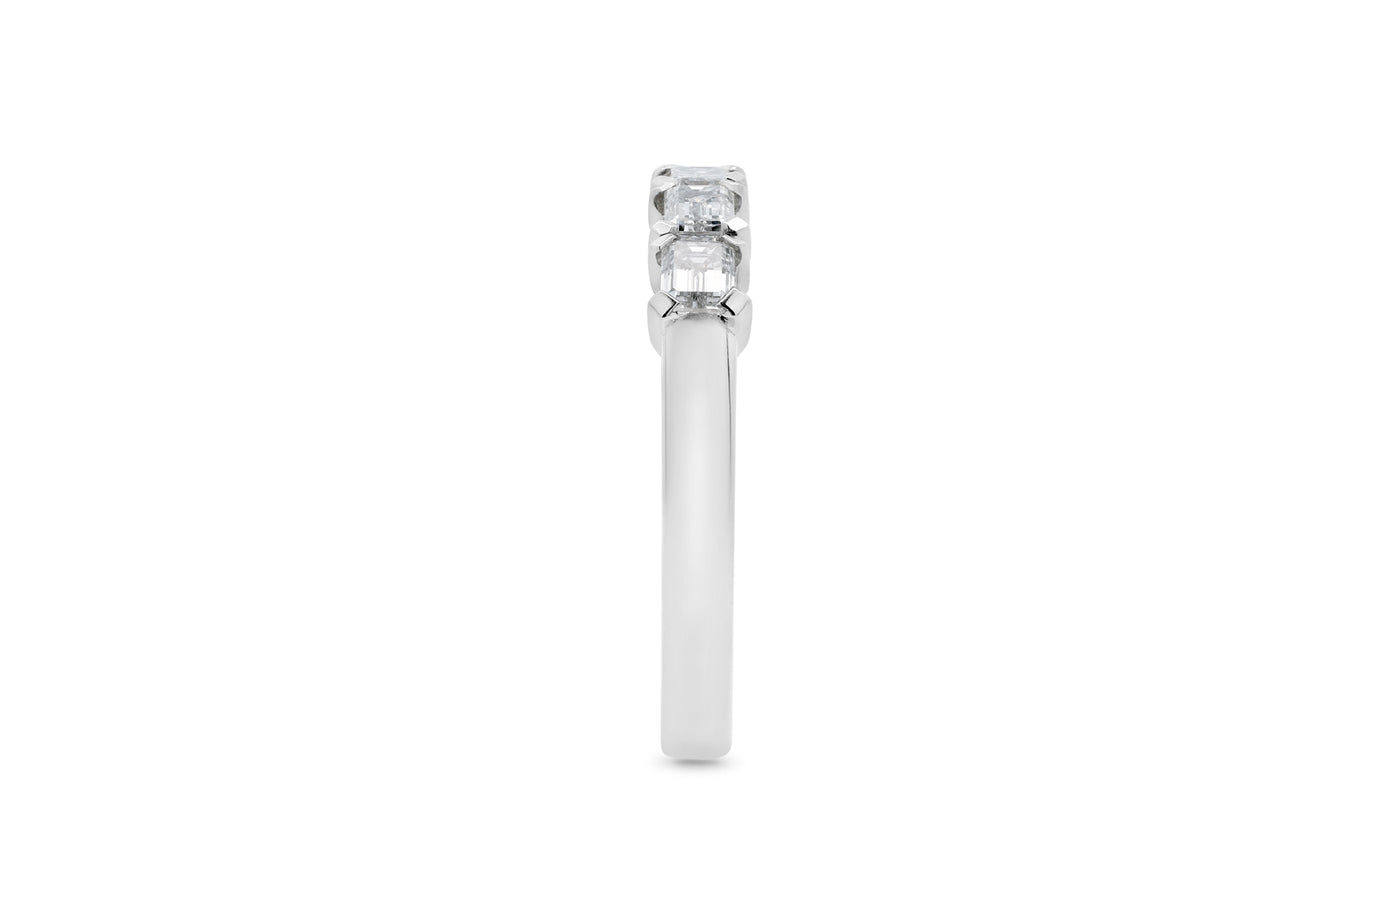 Emerald Cut Diamond Claw Set Ring in platinum or white gold